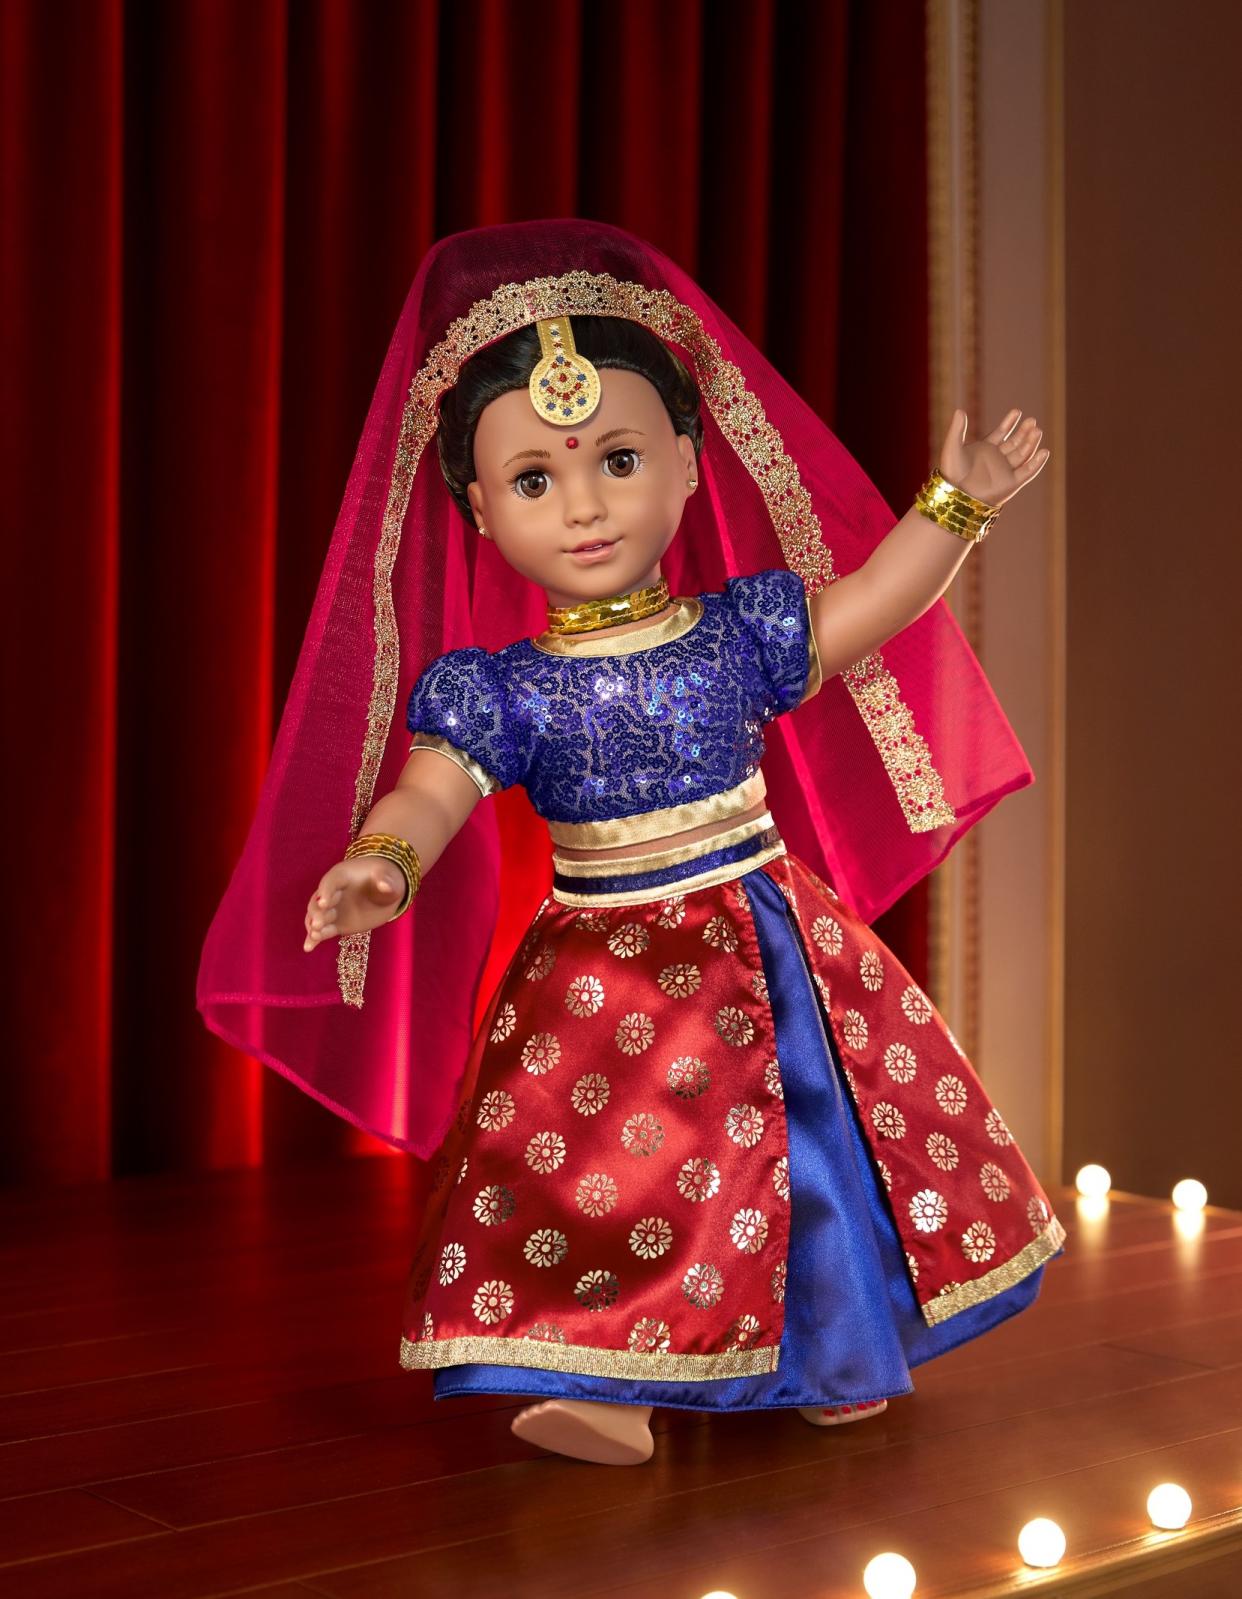 Kavi's wardrobe includes a Bollywood-inspired dance look. (Photo: Jason Tidwell for American Girl)